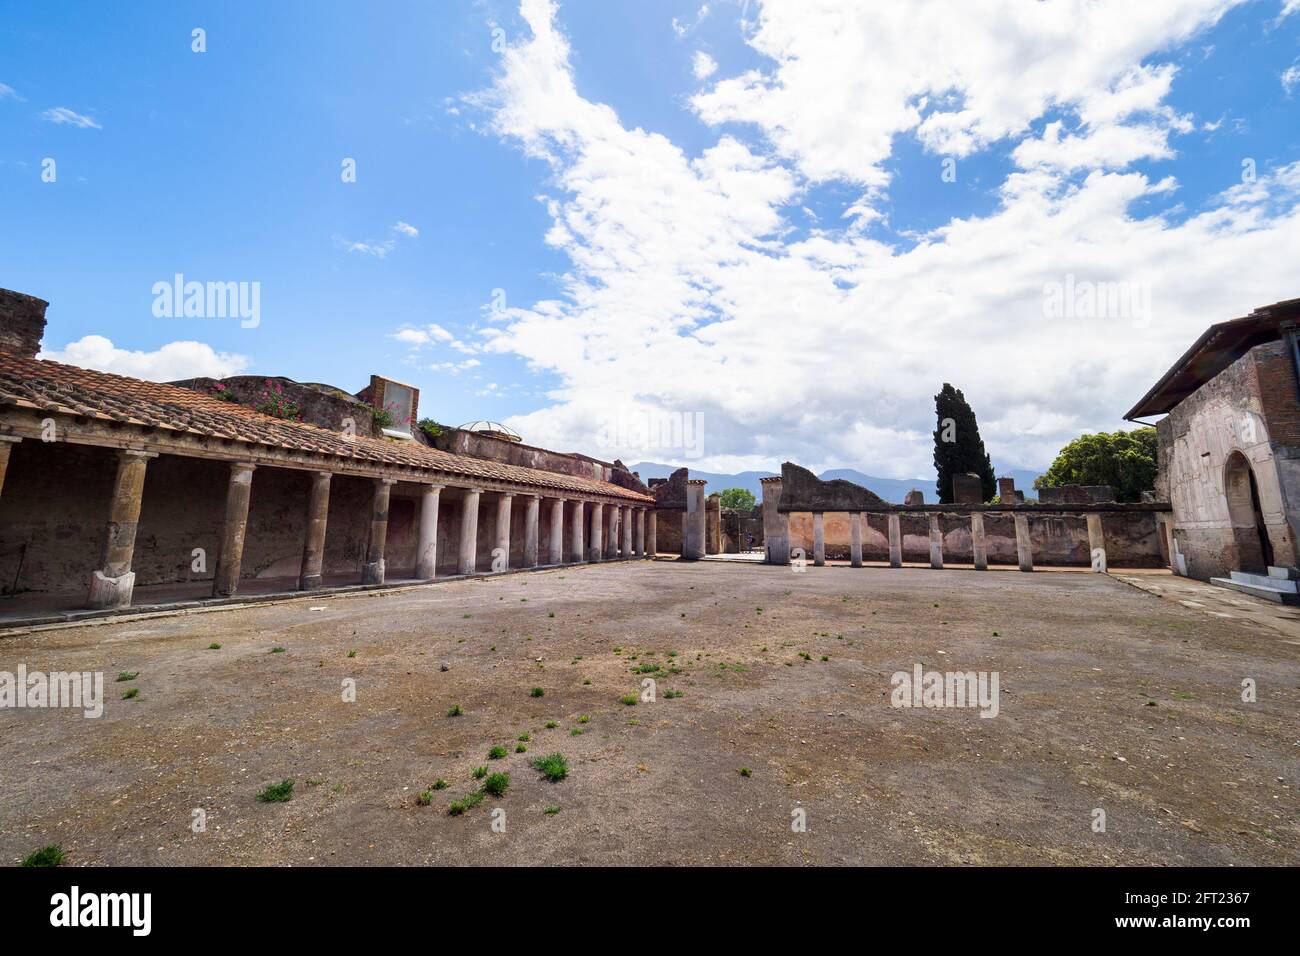 Portico in the Stabian Baths (terme Stabiane) - Pompeii archaeological site, Italy Stock Photo